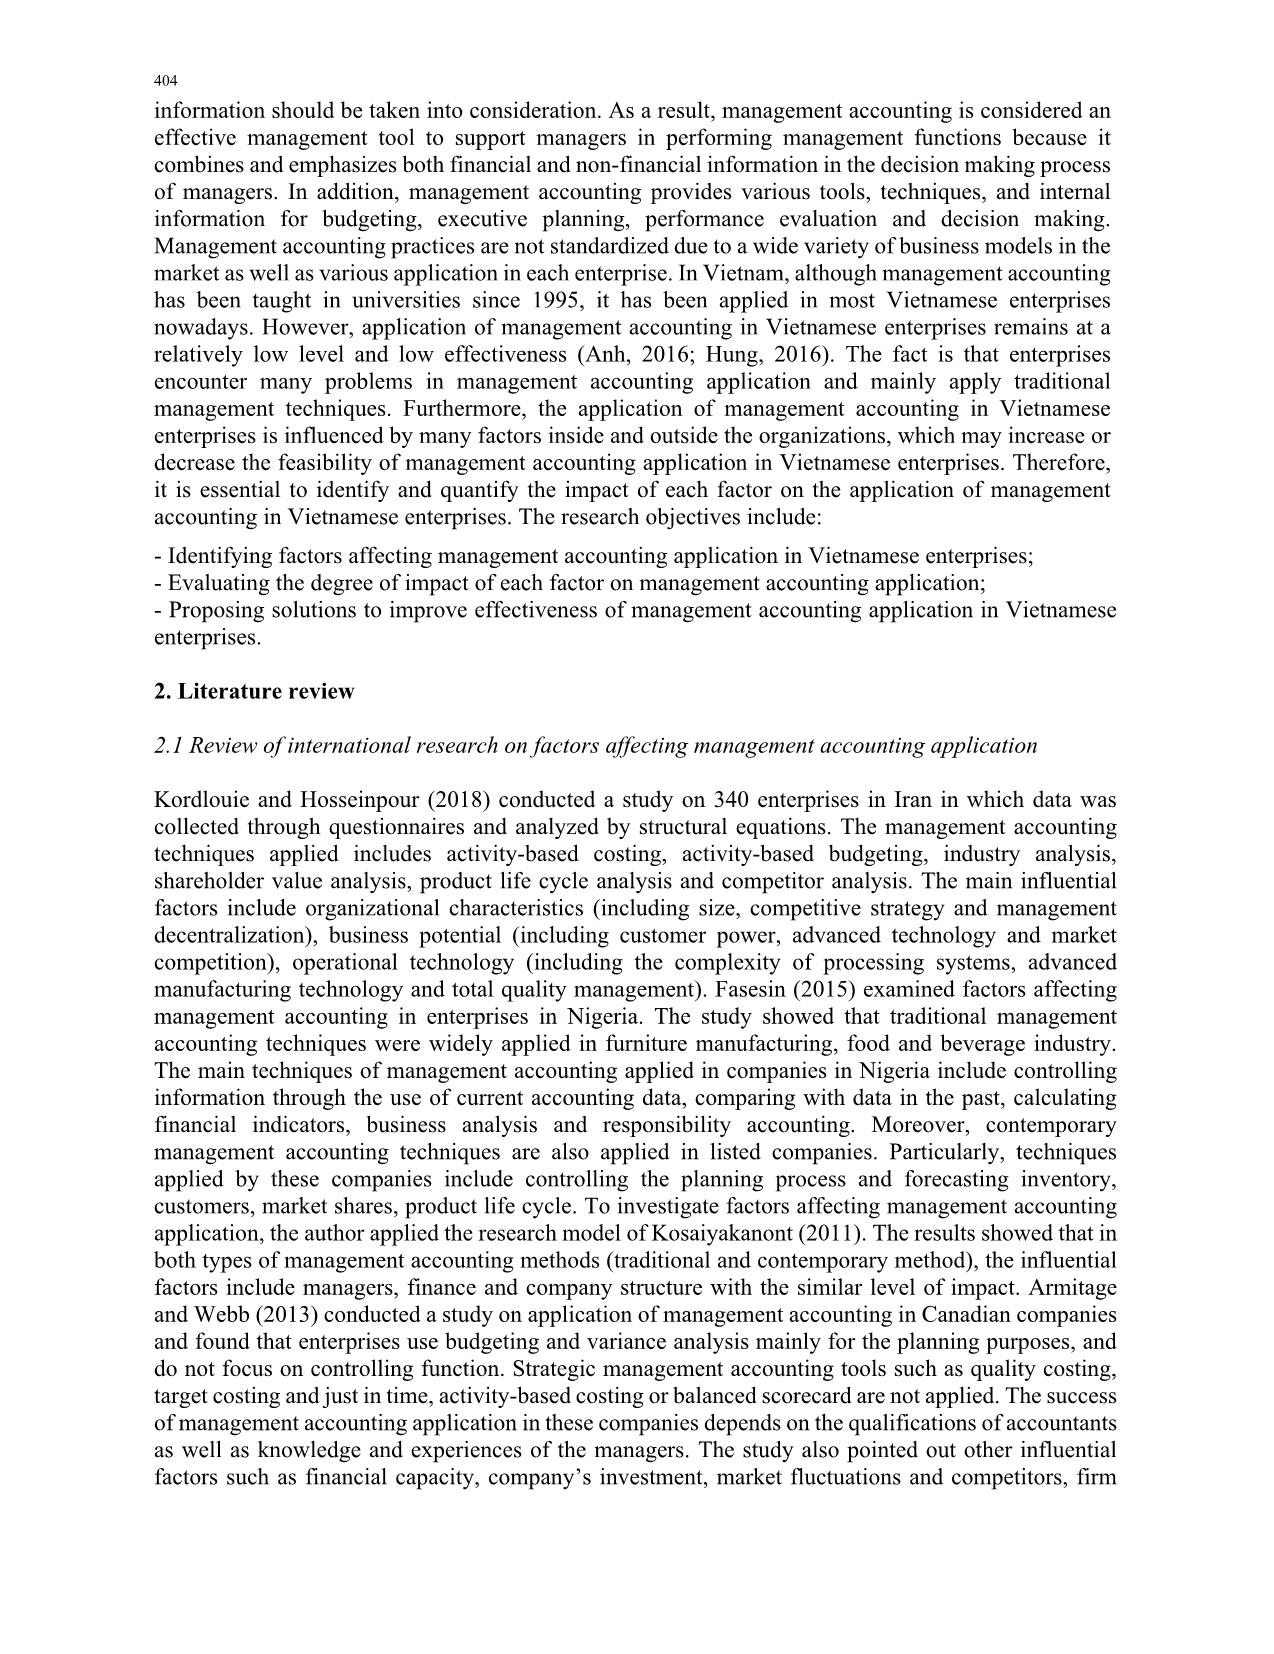 Factors affecting the application of management accounting in Vietnamese enterprises trang 2